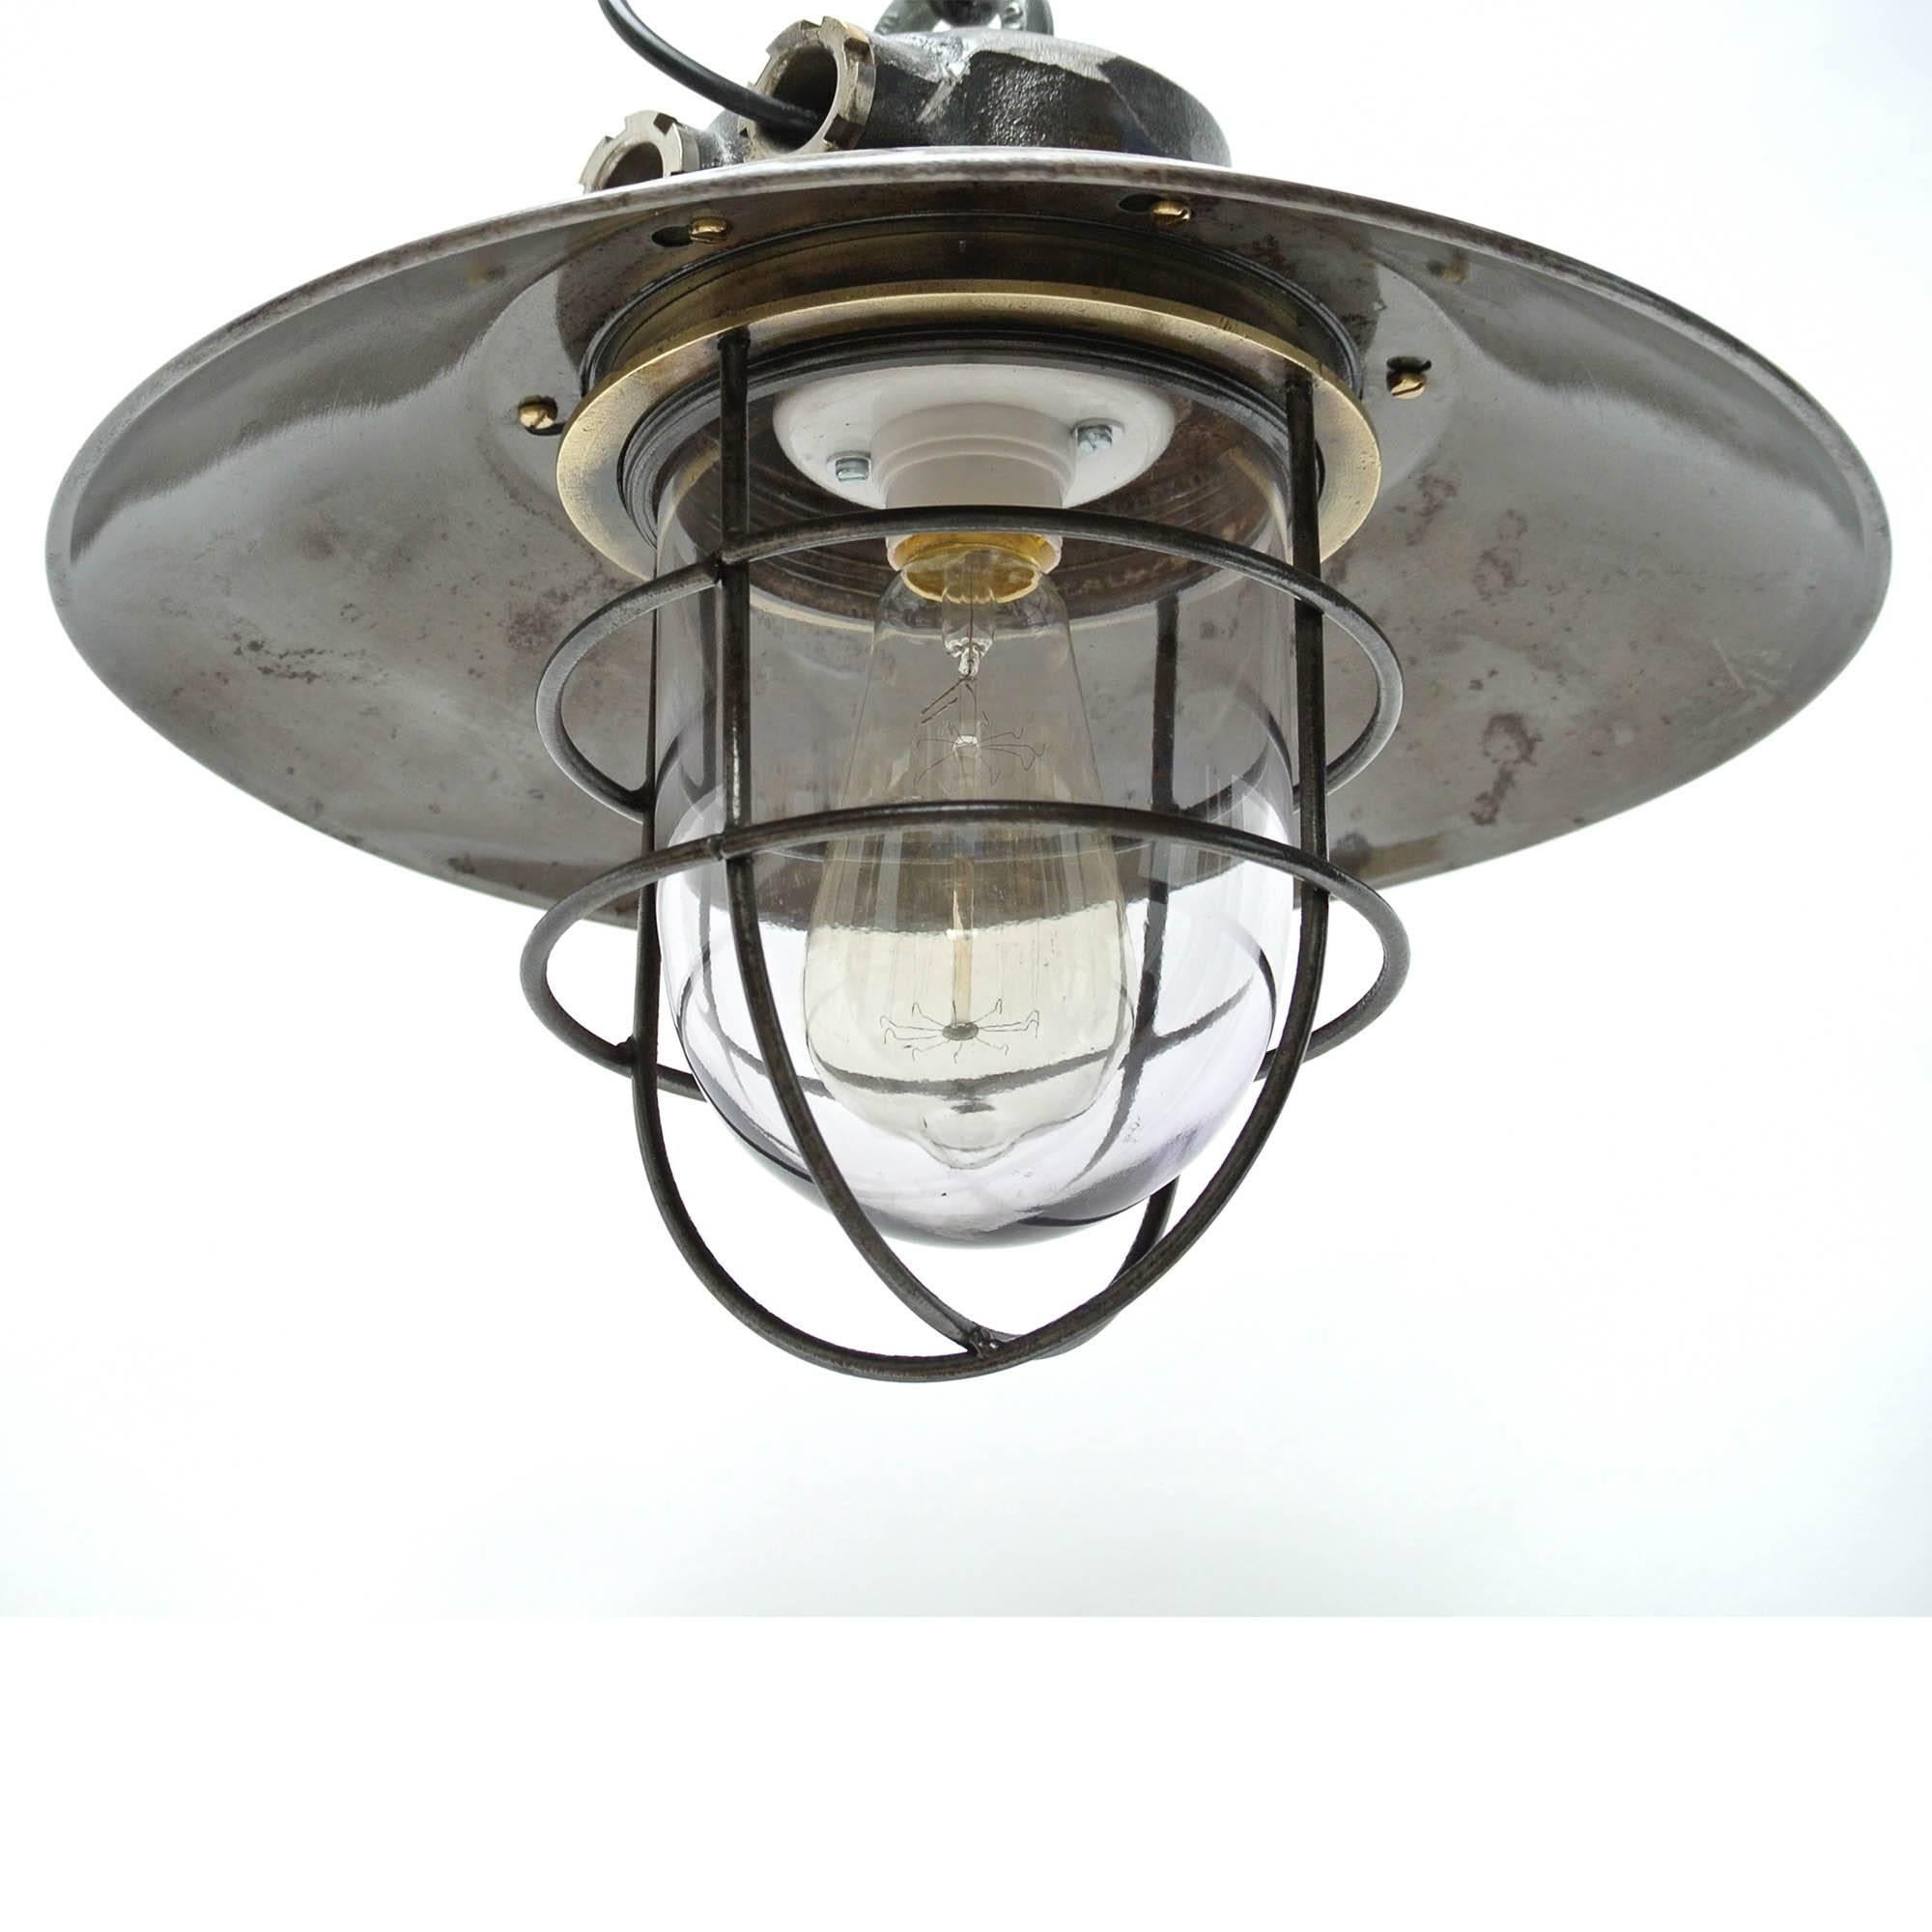 Brass Ceiling Lamp Made of Steel with Light Shade, circa 1950